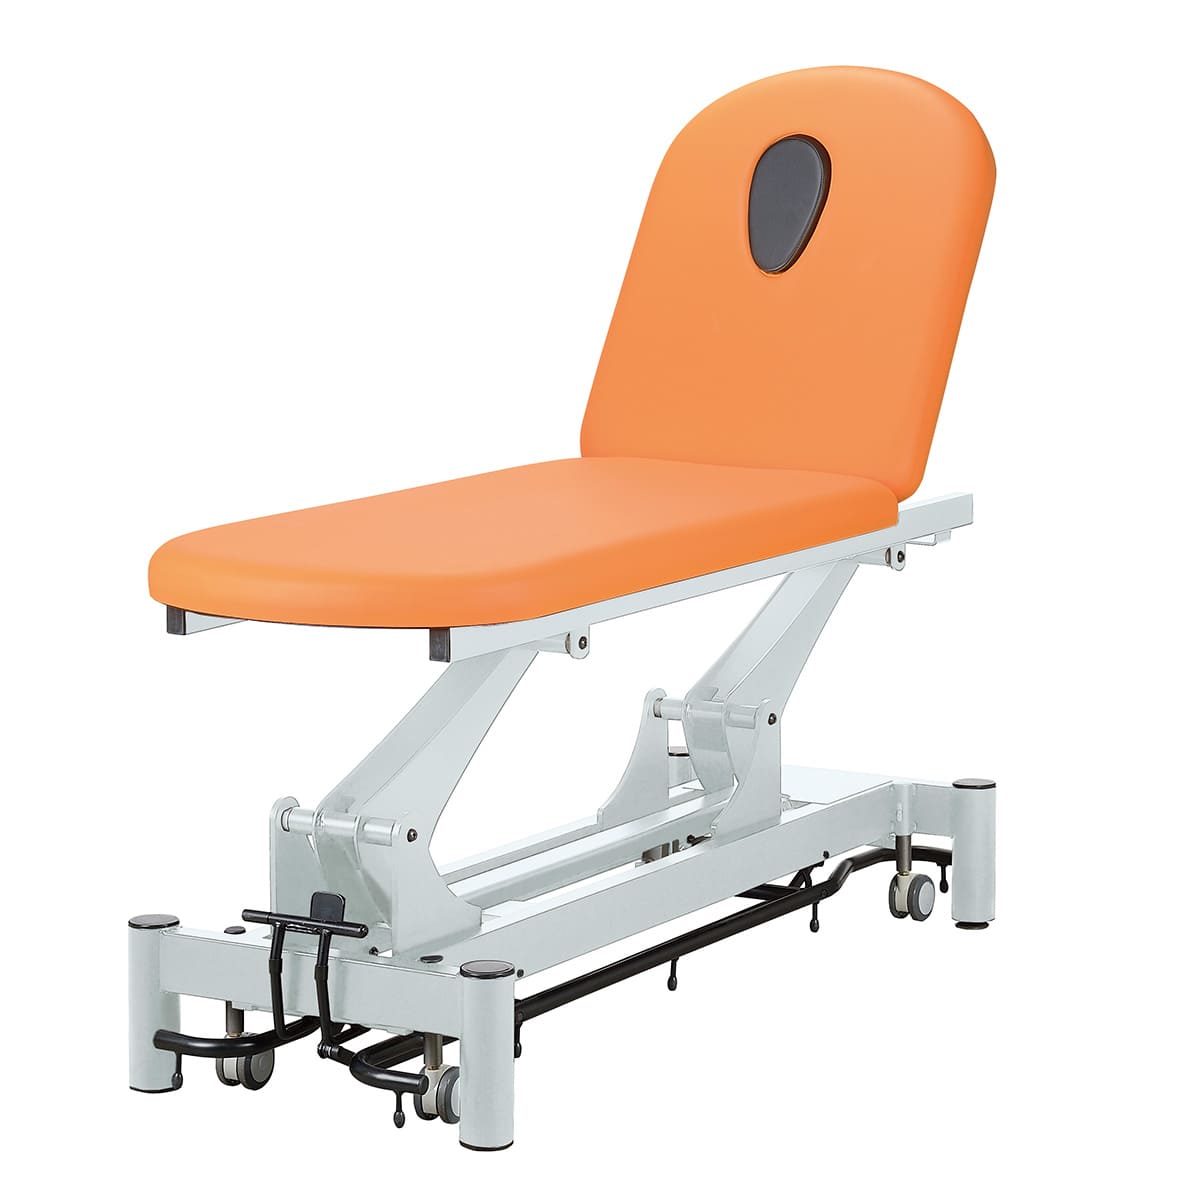 Physiotherapy table 2 sections, with face hole, all around foot controller